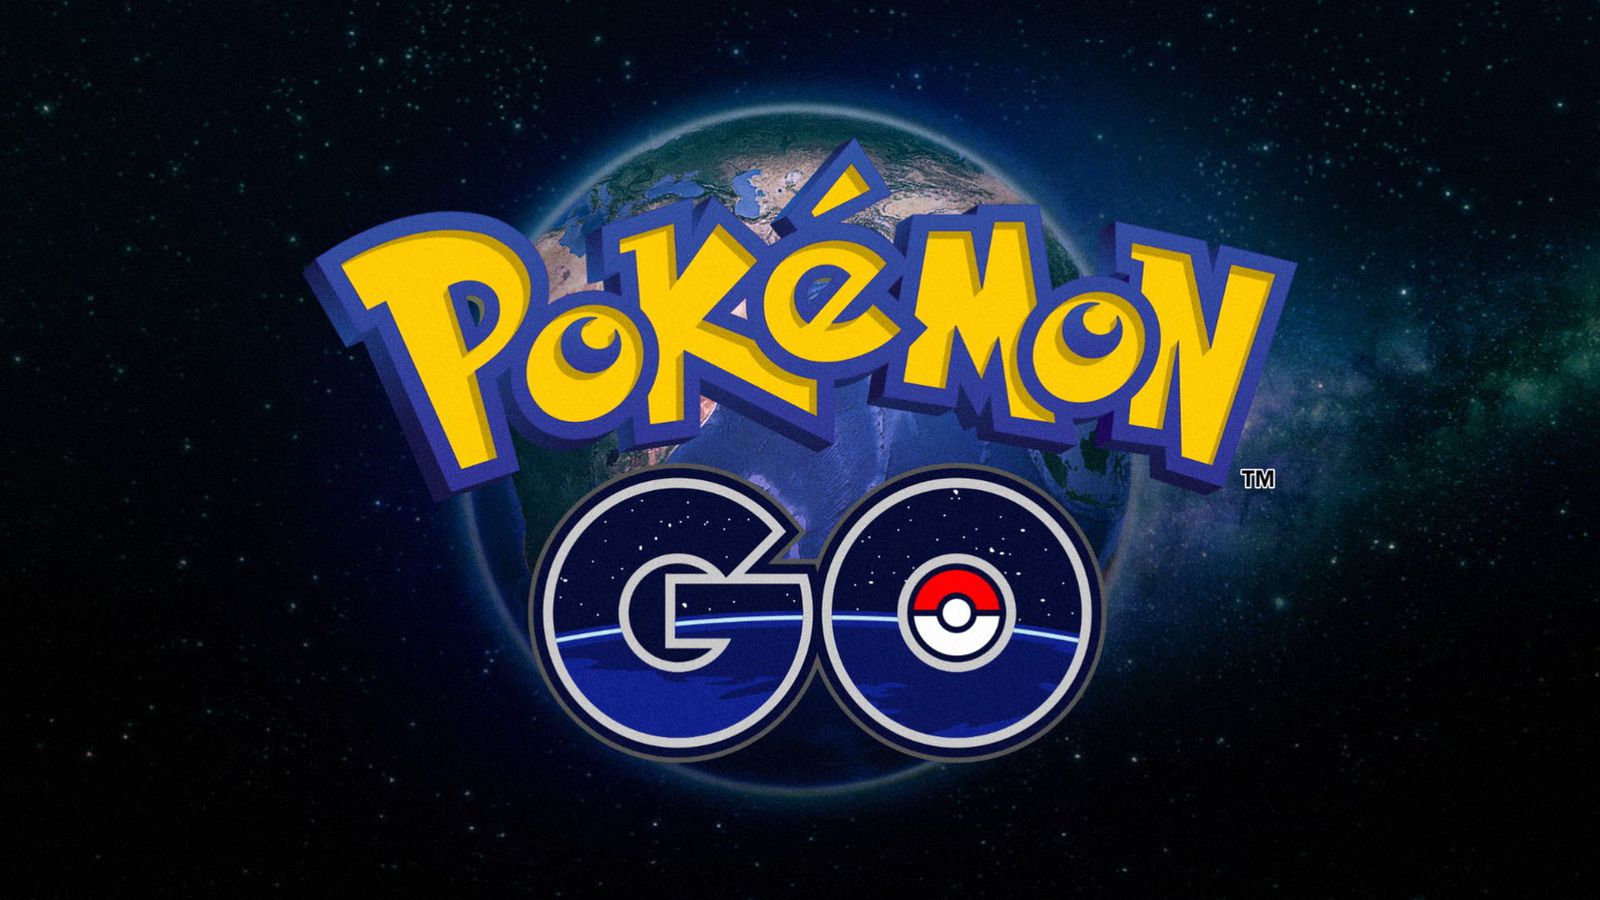 Pokémon Go Leads To Some Really Unusual Business Ideas